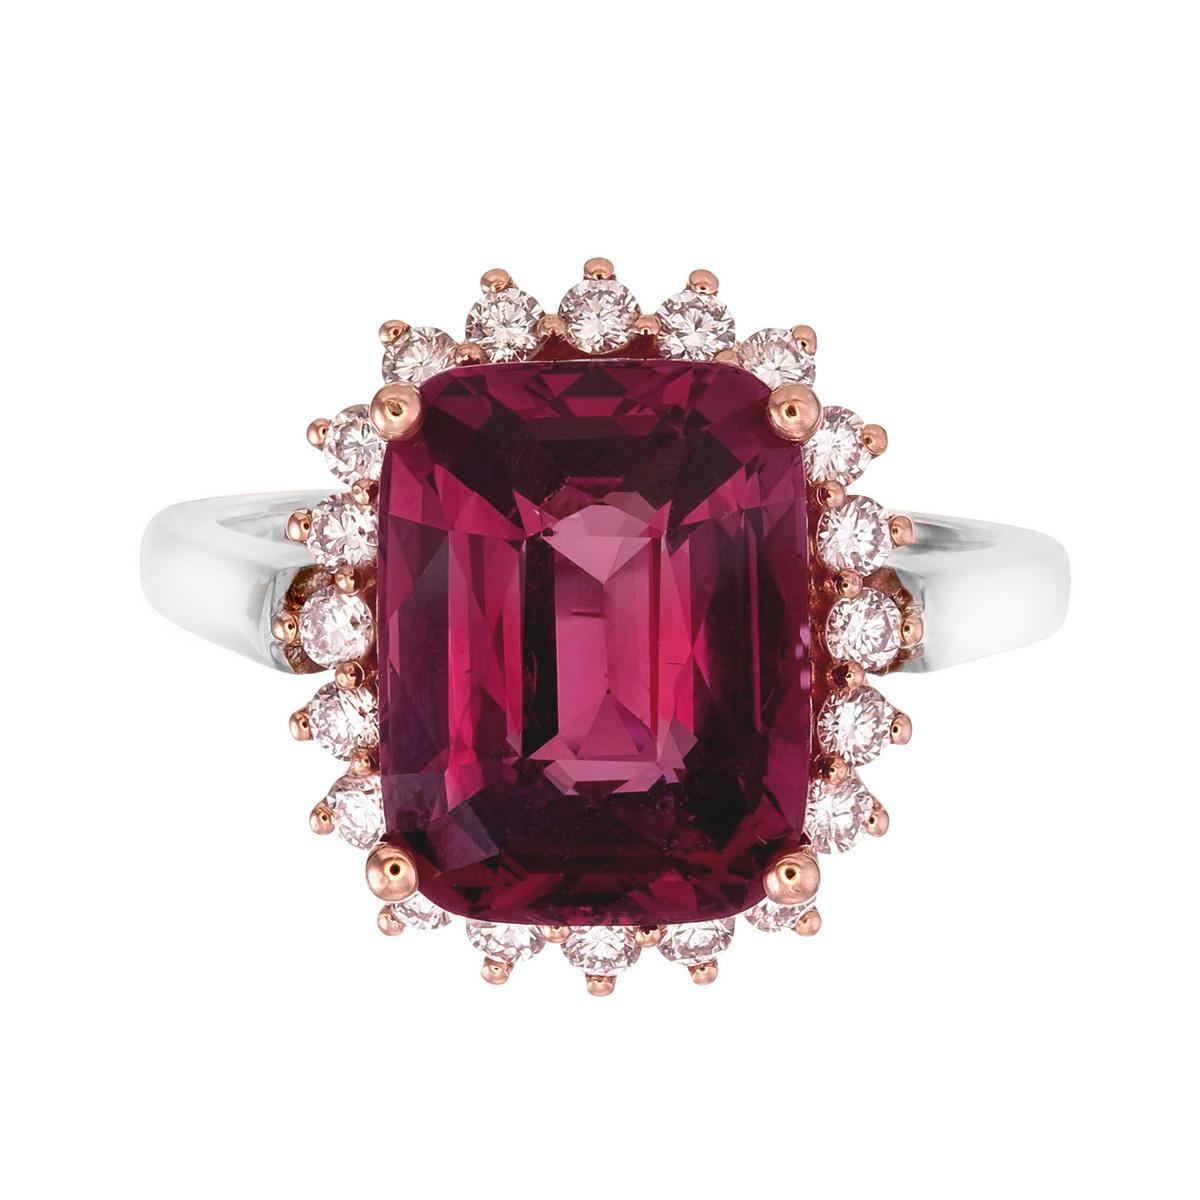 Contemporary Orloff of Denmark, 6.40 ct Pinkish Red Spinel Diamond Ring in 18 Karat Gold For Sale